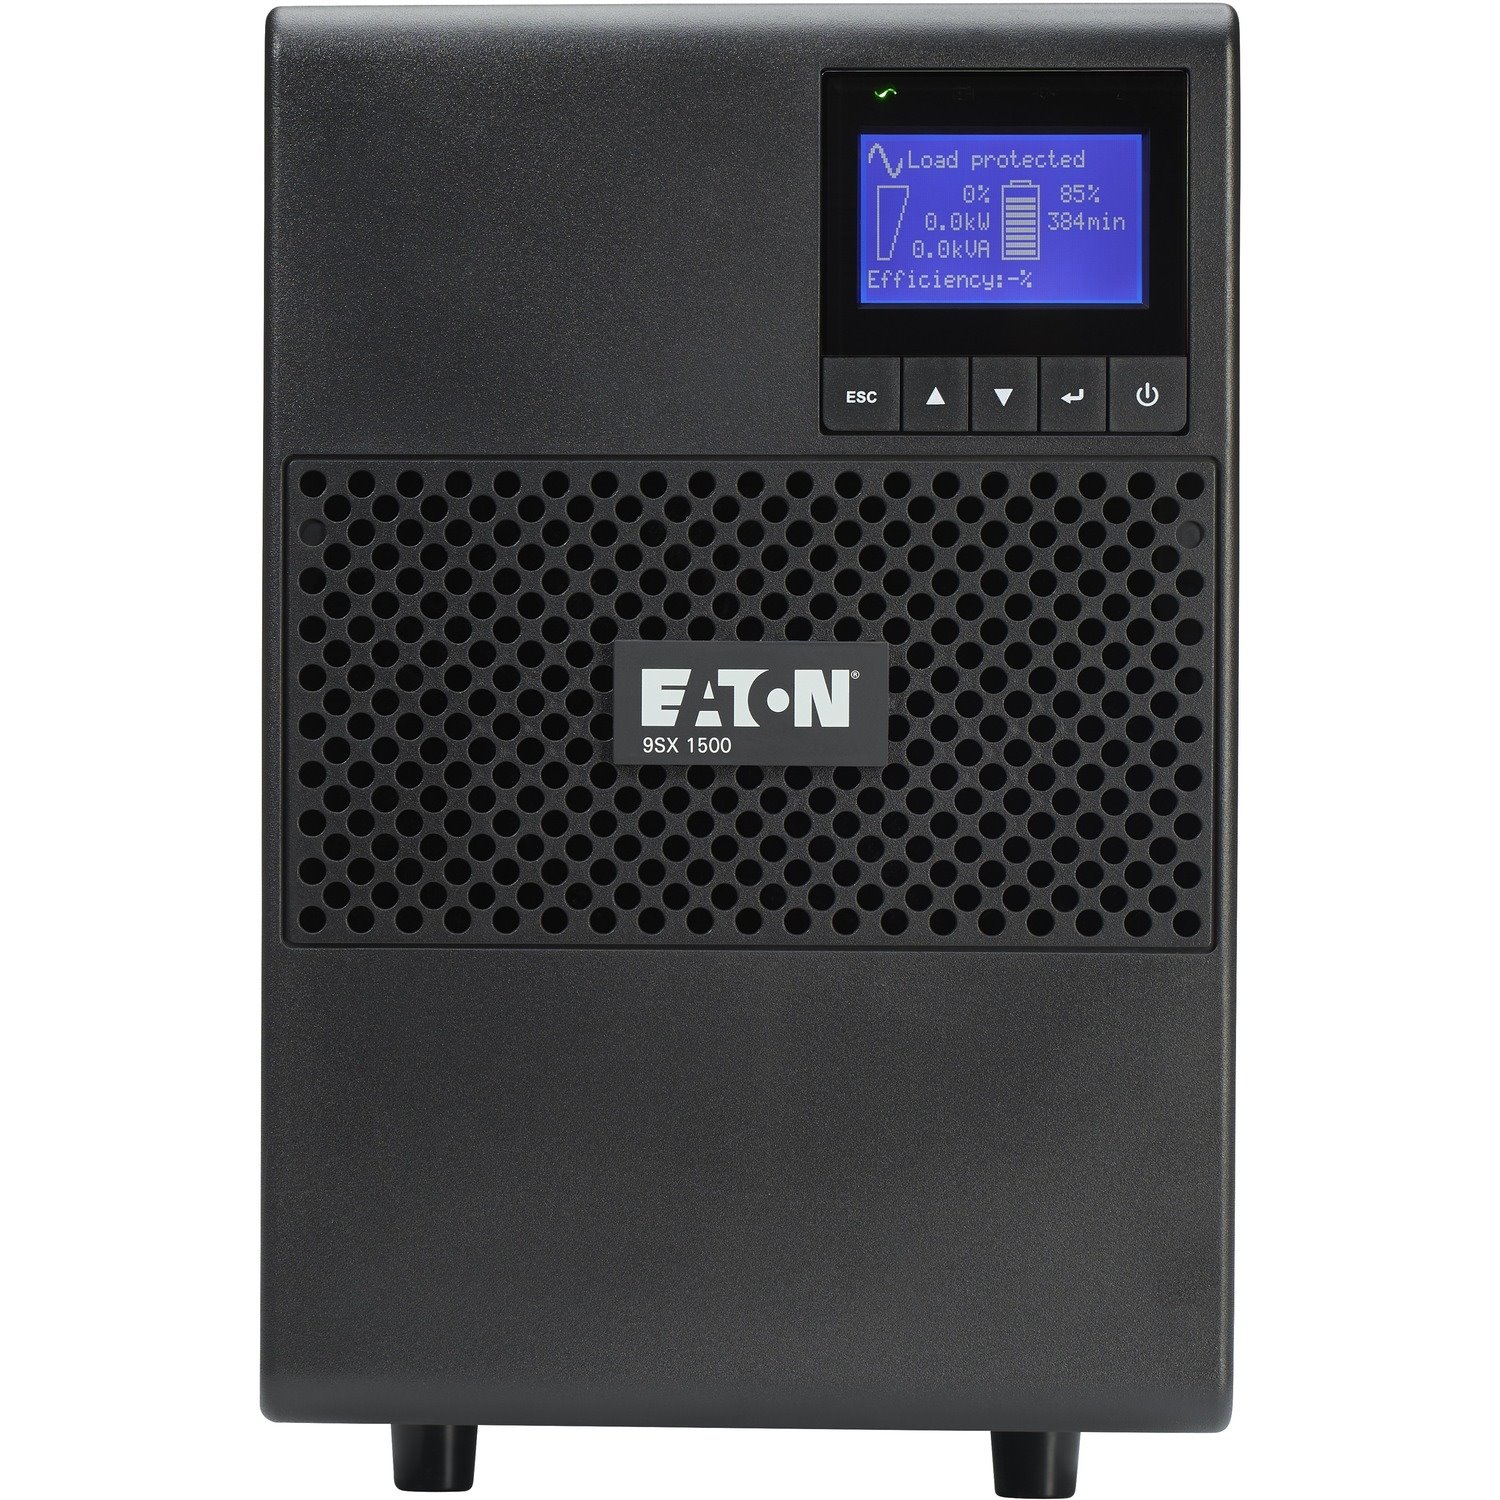 Eaton 9SX 1500VA 1350W 120V Online Double-Conversion UPS - 6 NEMA 5-15R Outlets, Cybersecure Network Card Option, Extended Run, Tower - Battery Backup